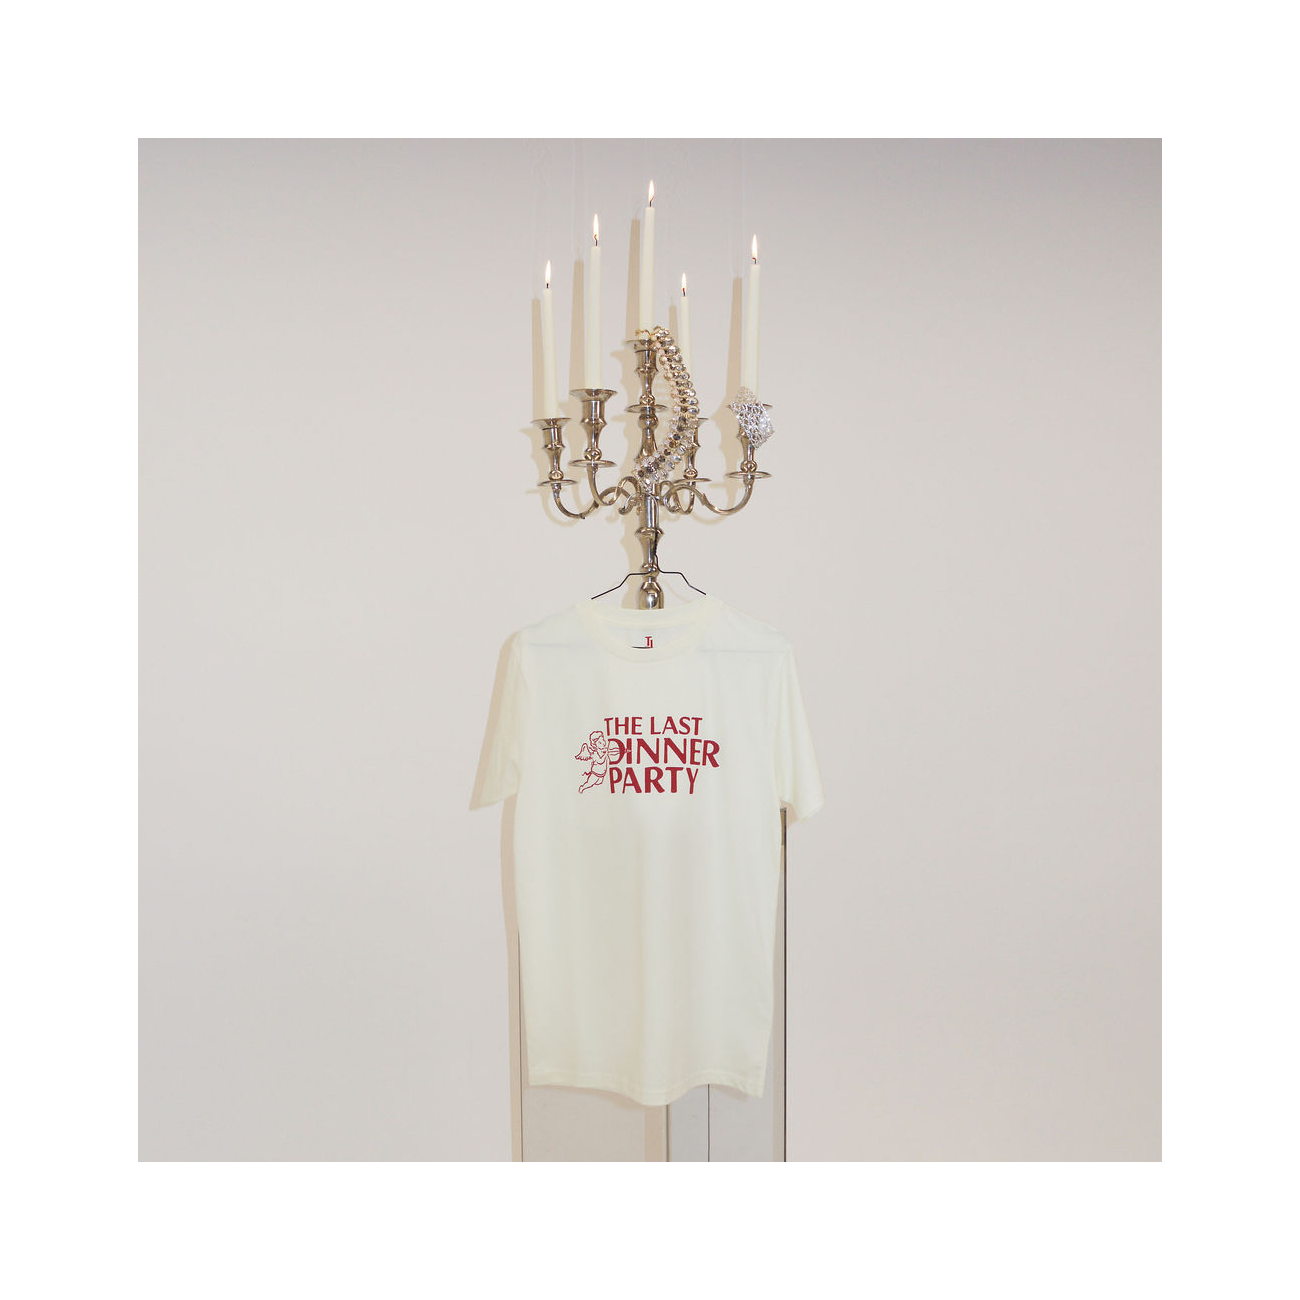 The Last Dinner Party - Off-White Logo Tee